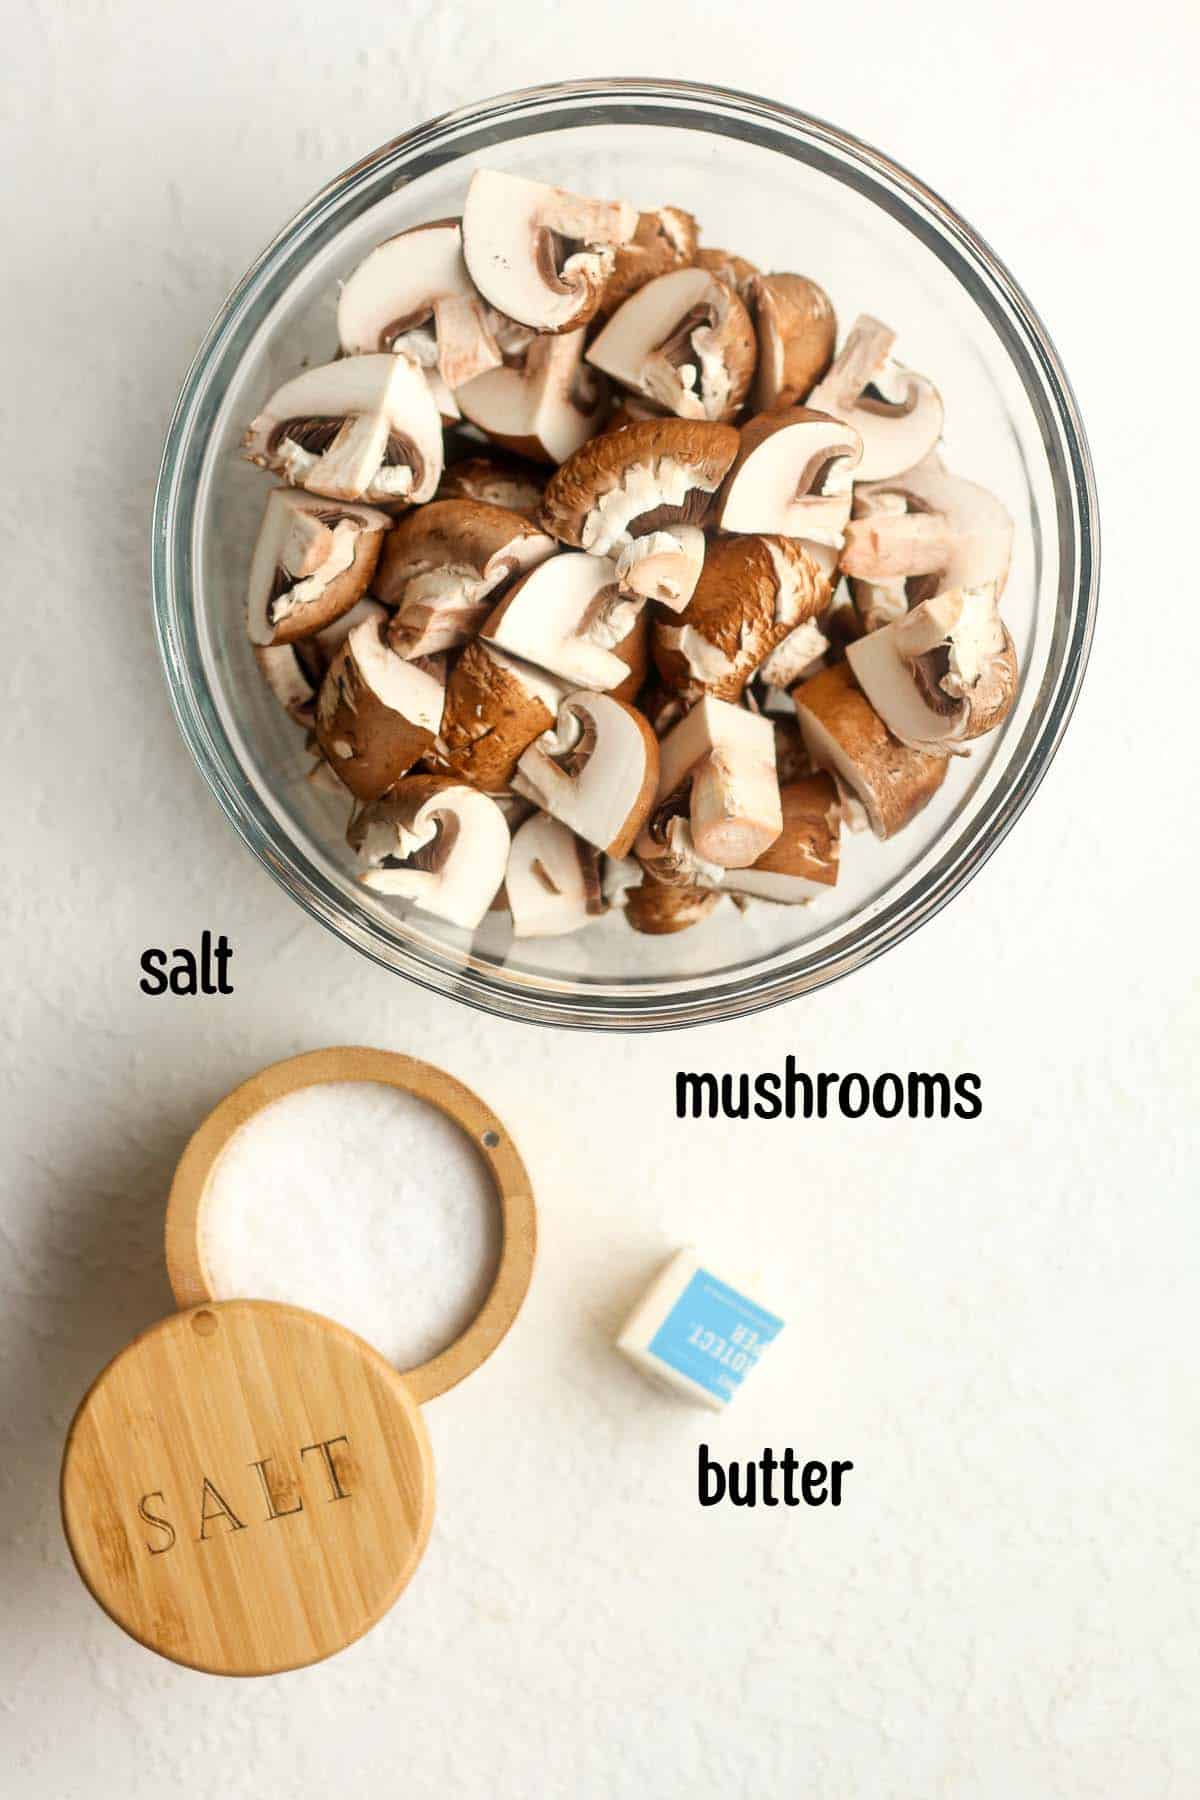 The ingredients required to brown mushrooms.